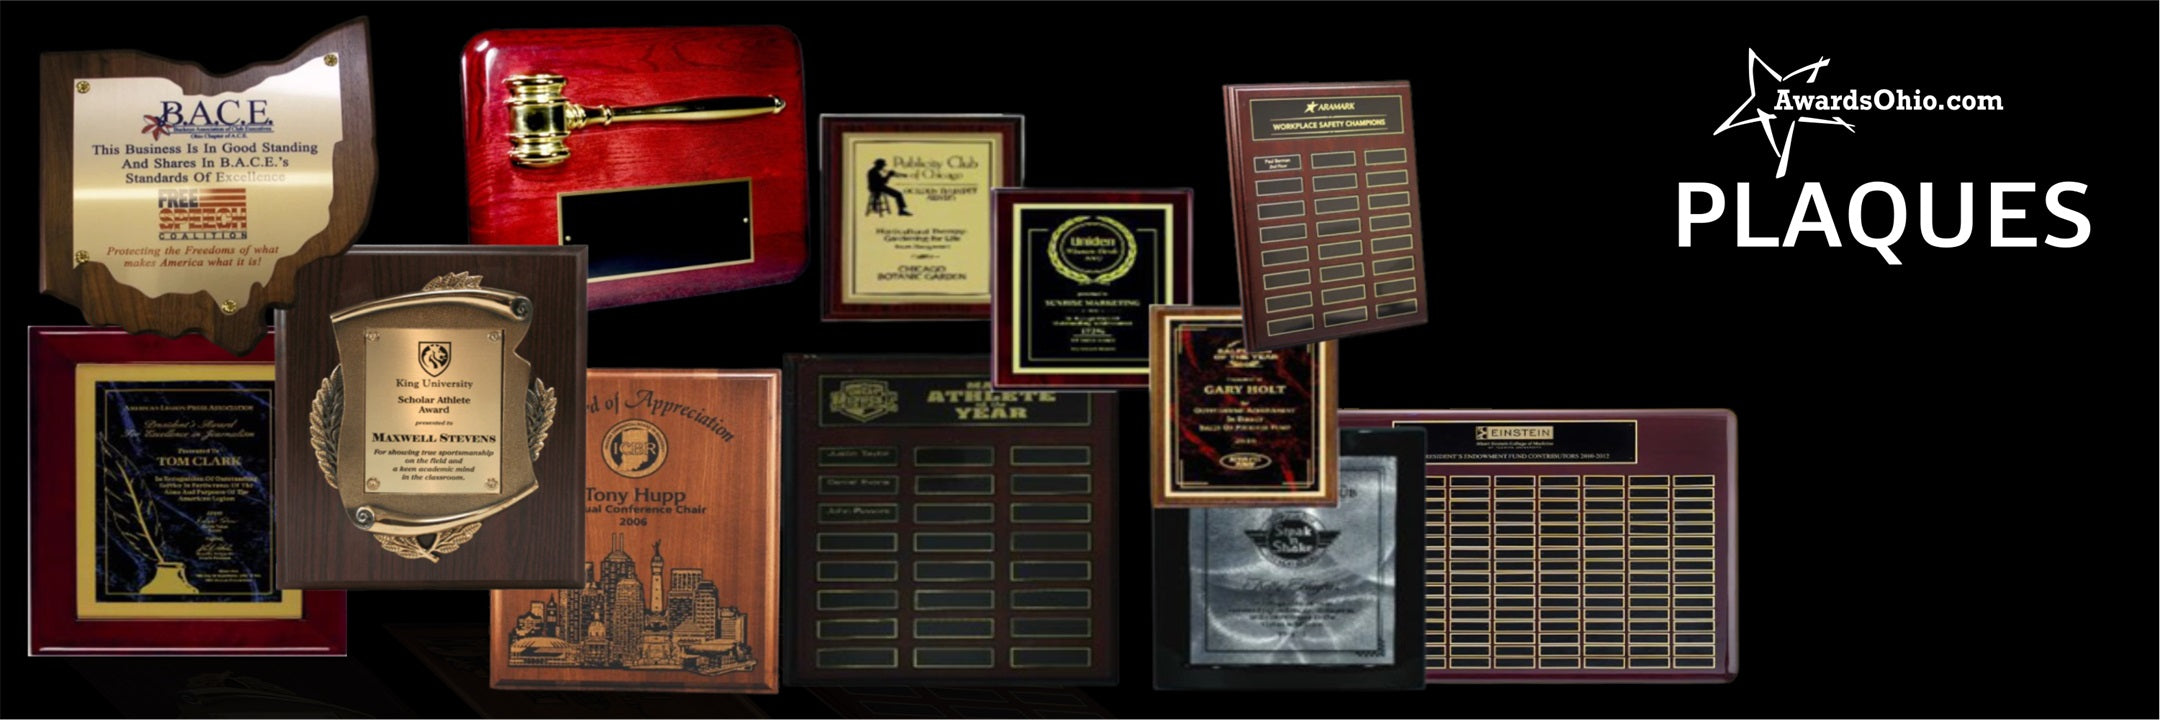 Plaques made in Grove City Ohio